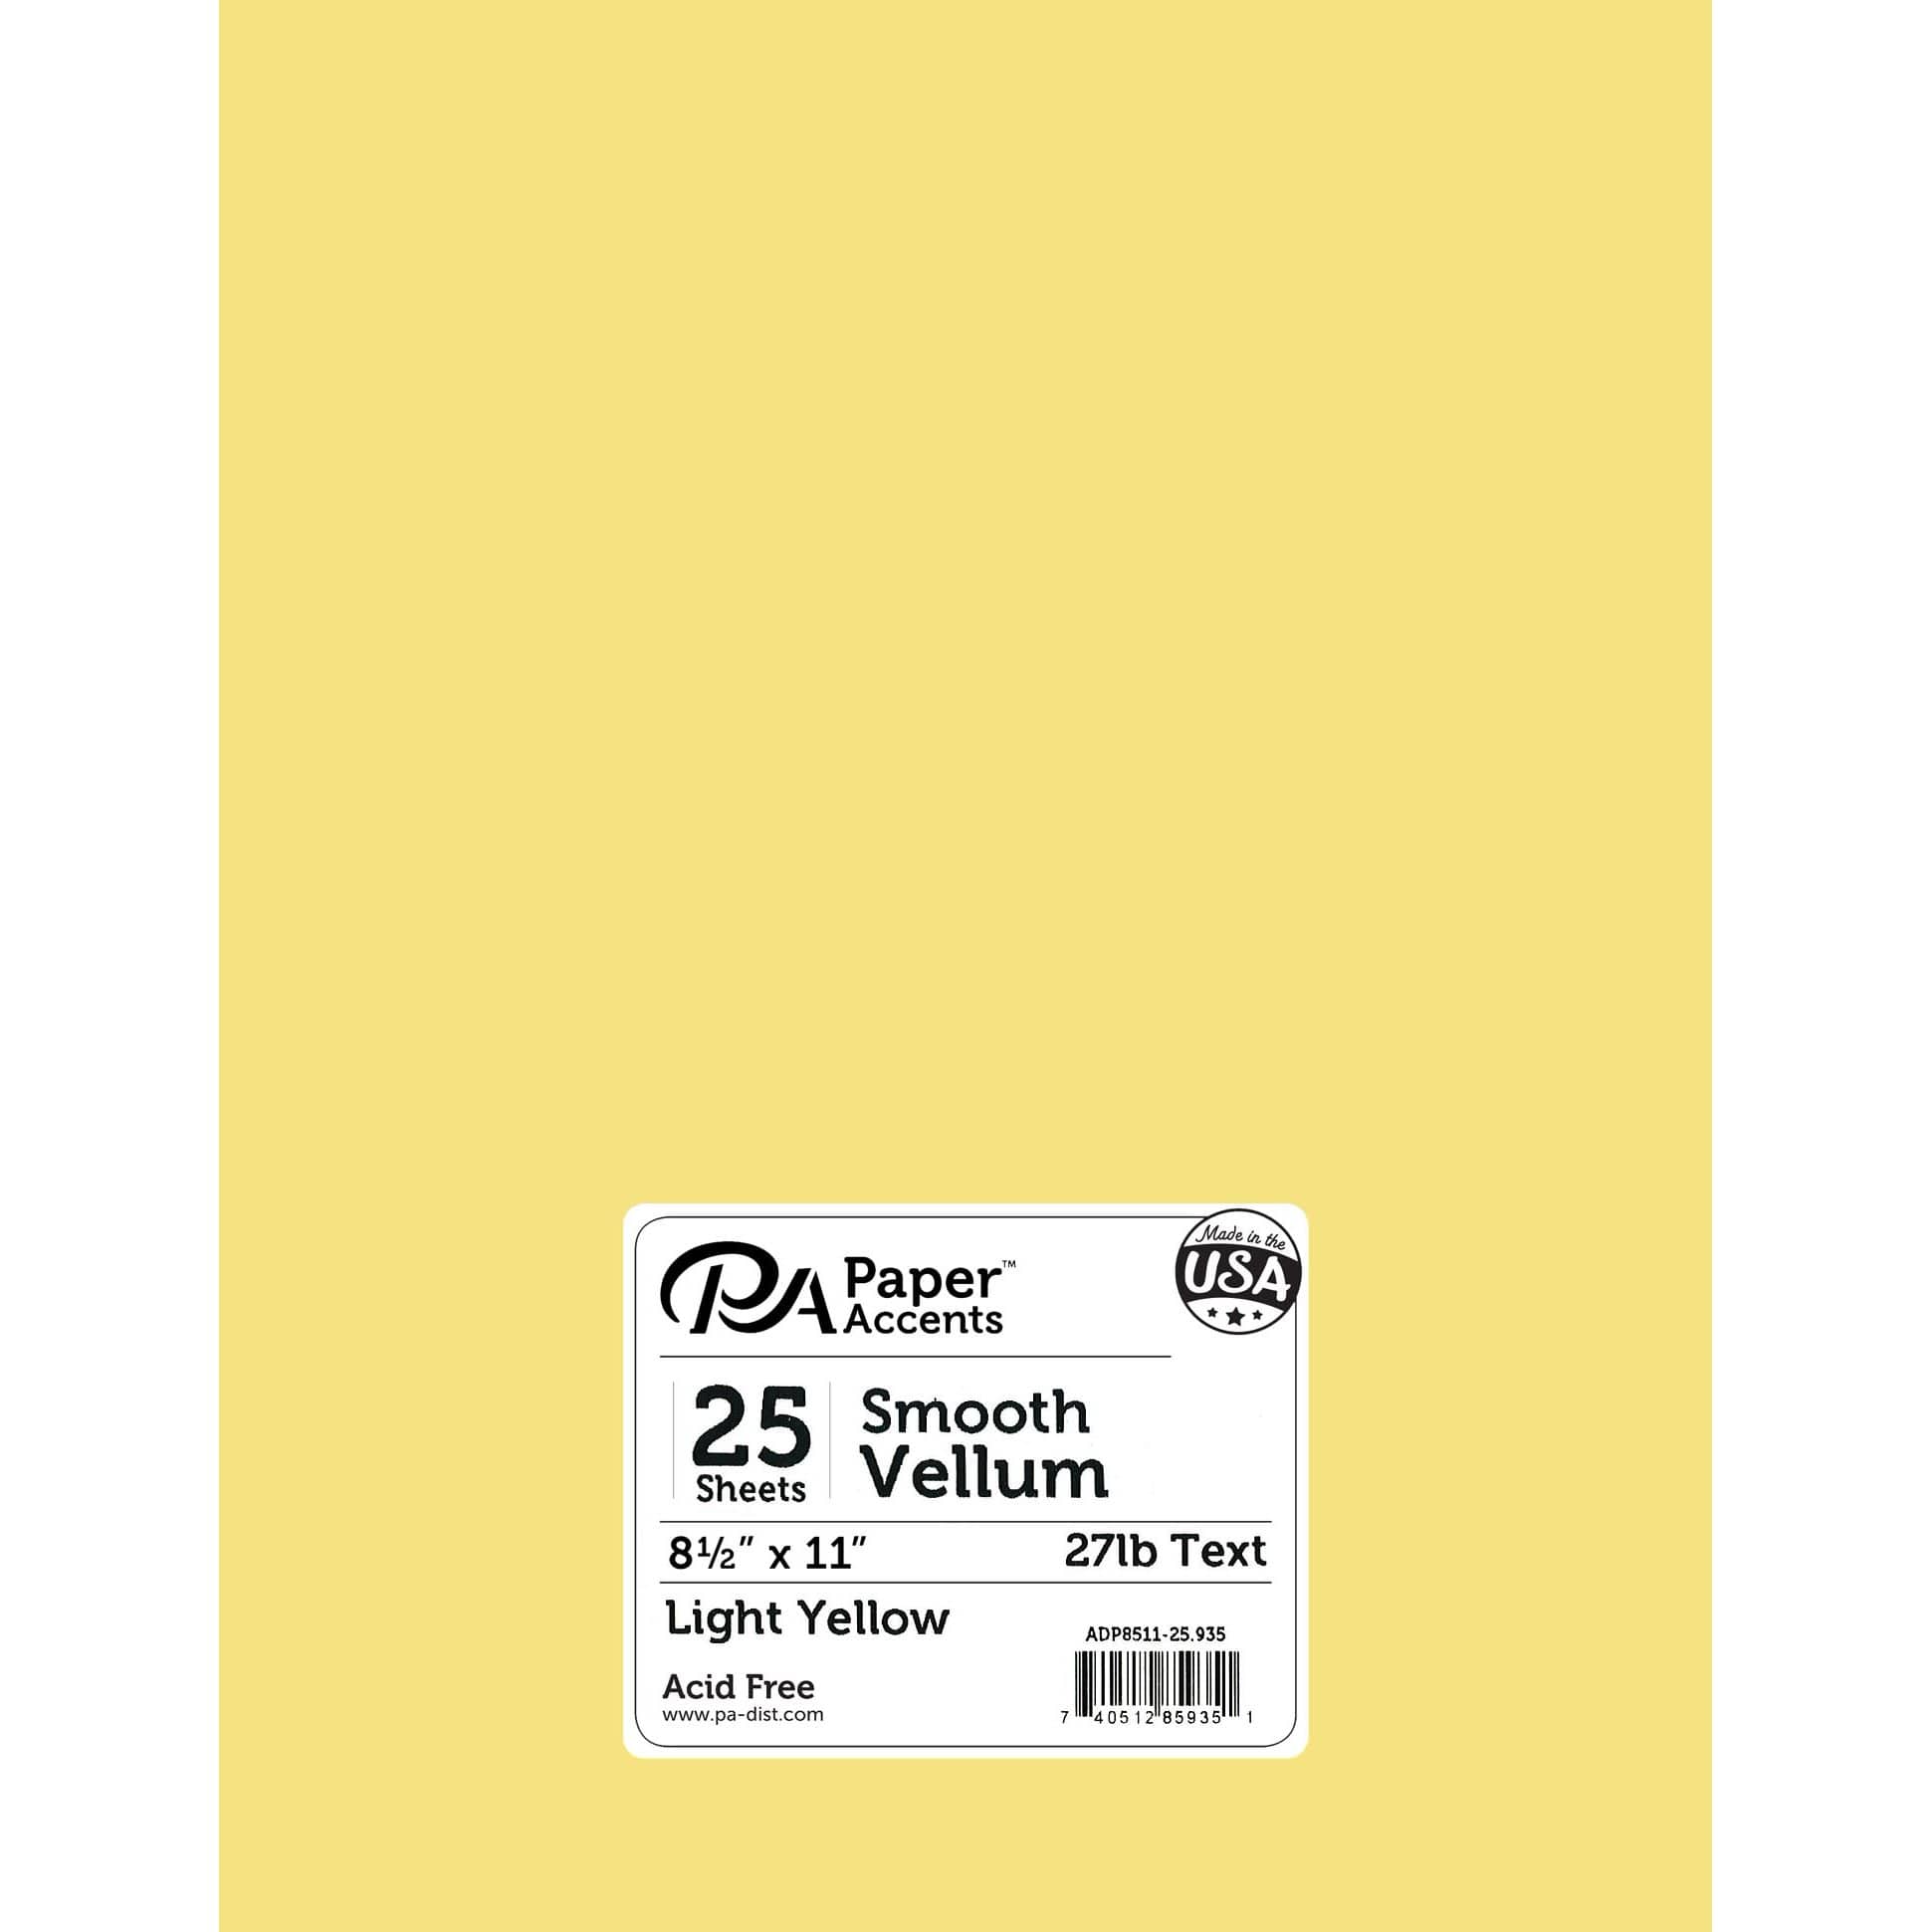 PA Paper™ Accents 8.5'' x 11'' 27lb. Smooth Vellum Paper, 25 Sheets